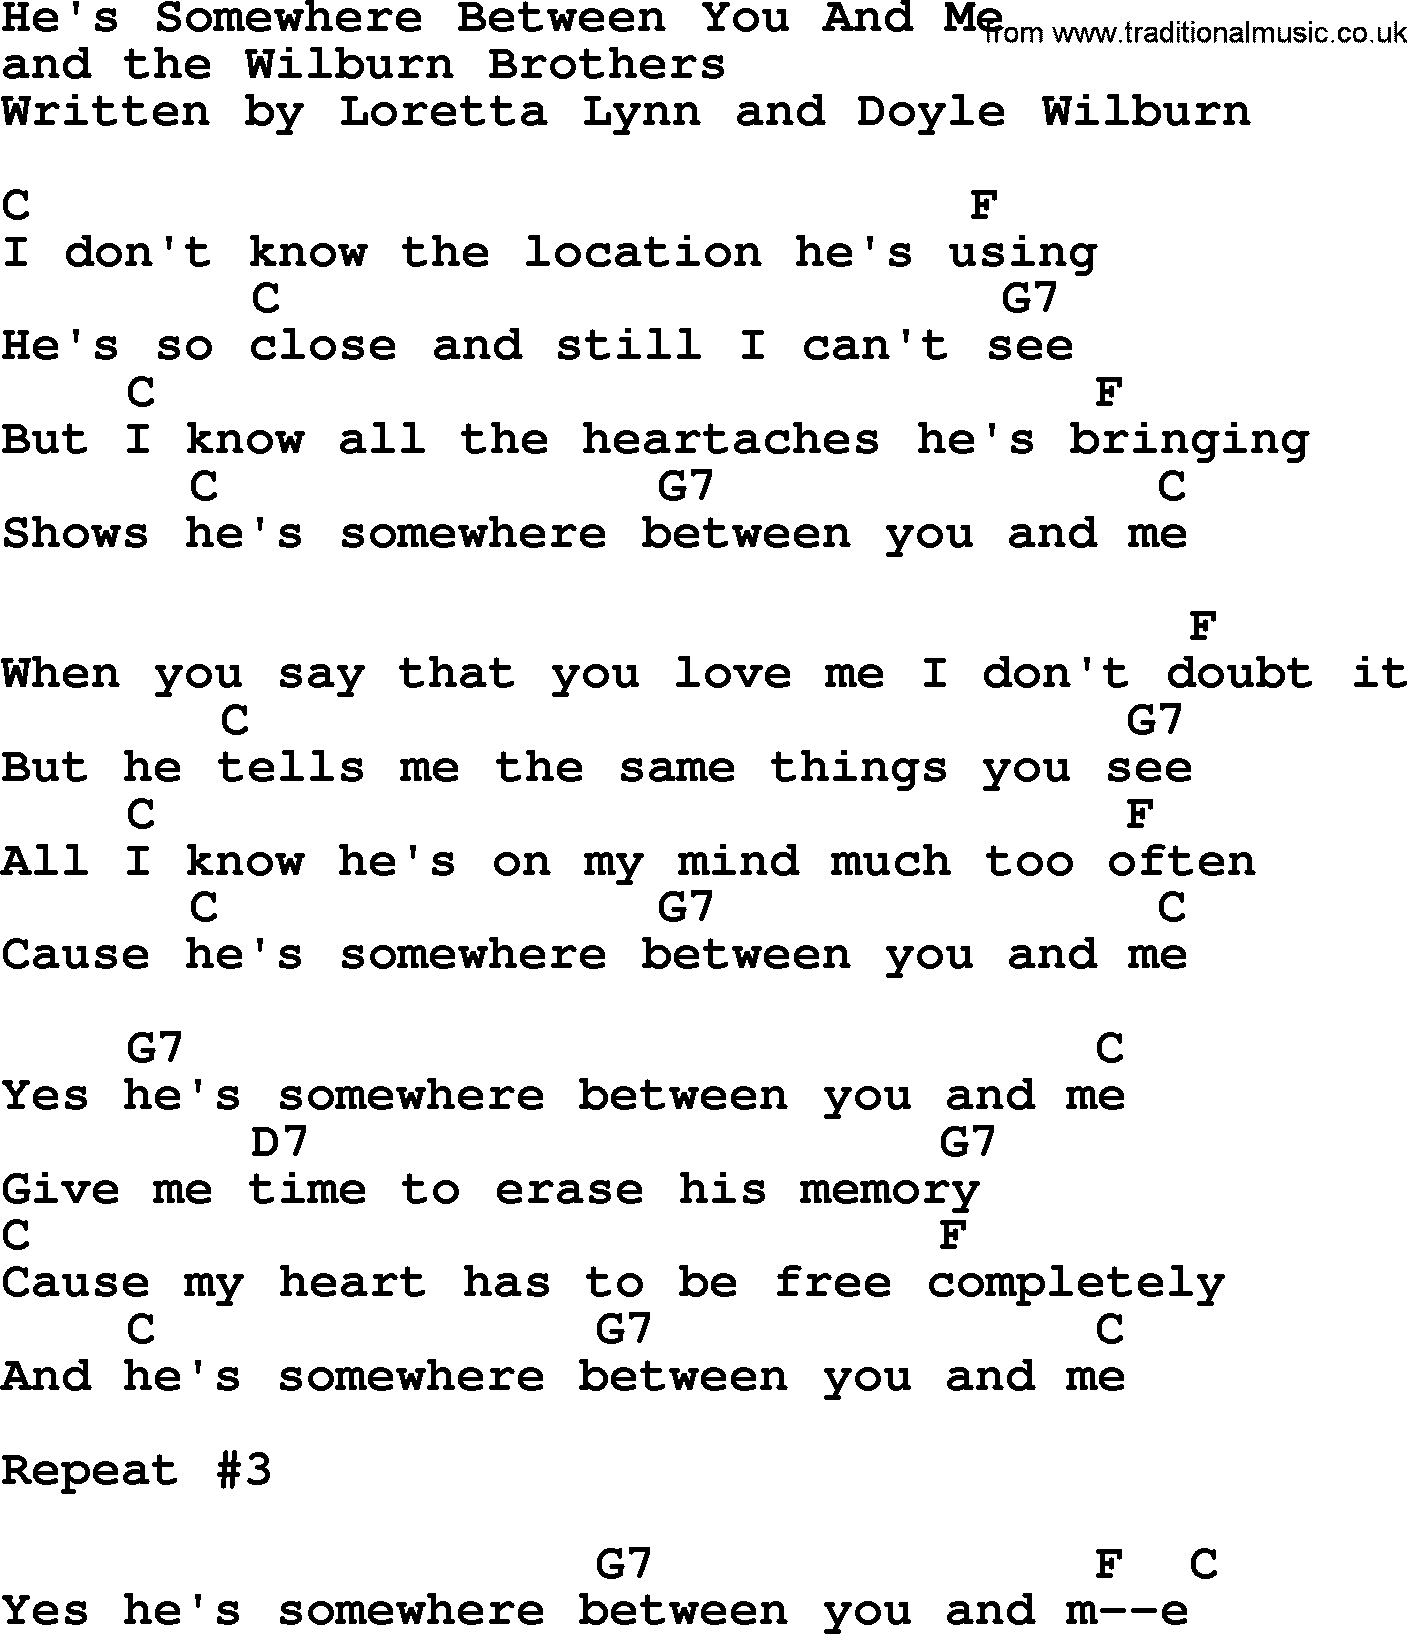 Loretta Lynn song: He's Somewhere Between You And Me lyrics and chords